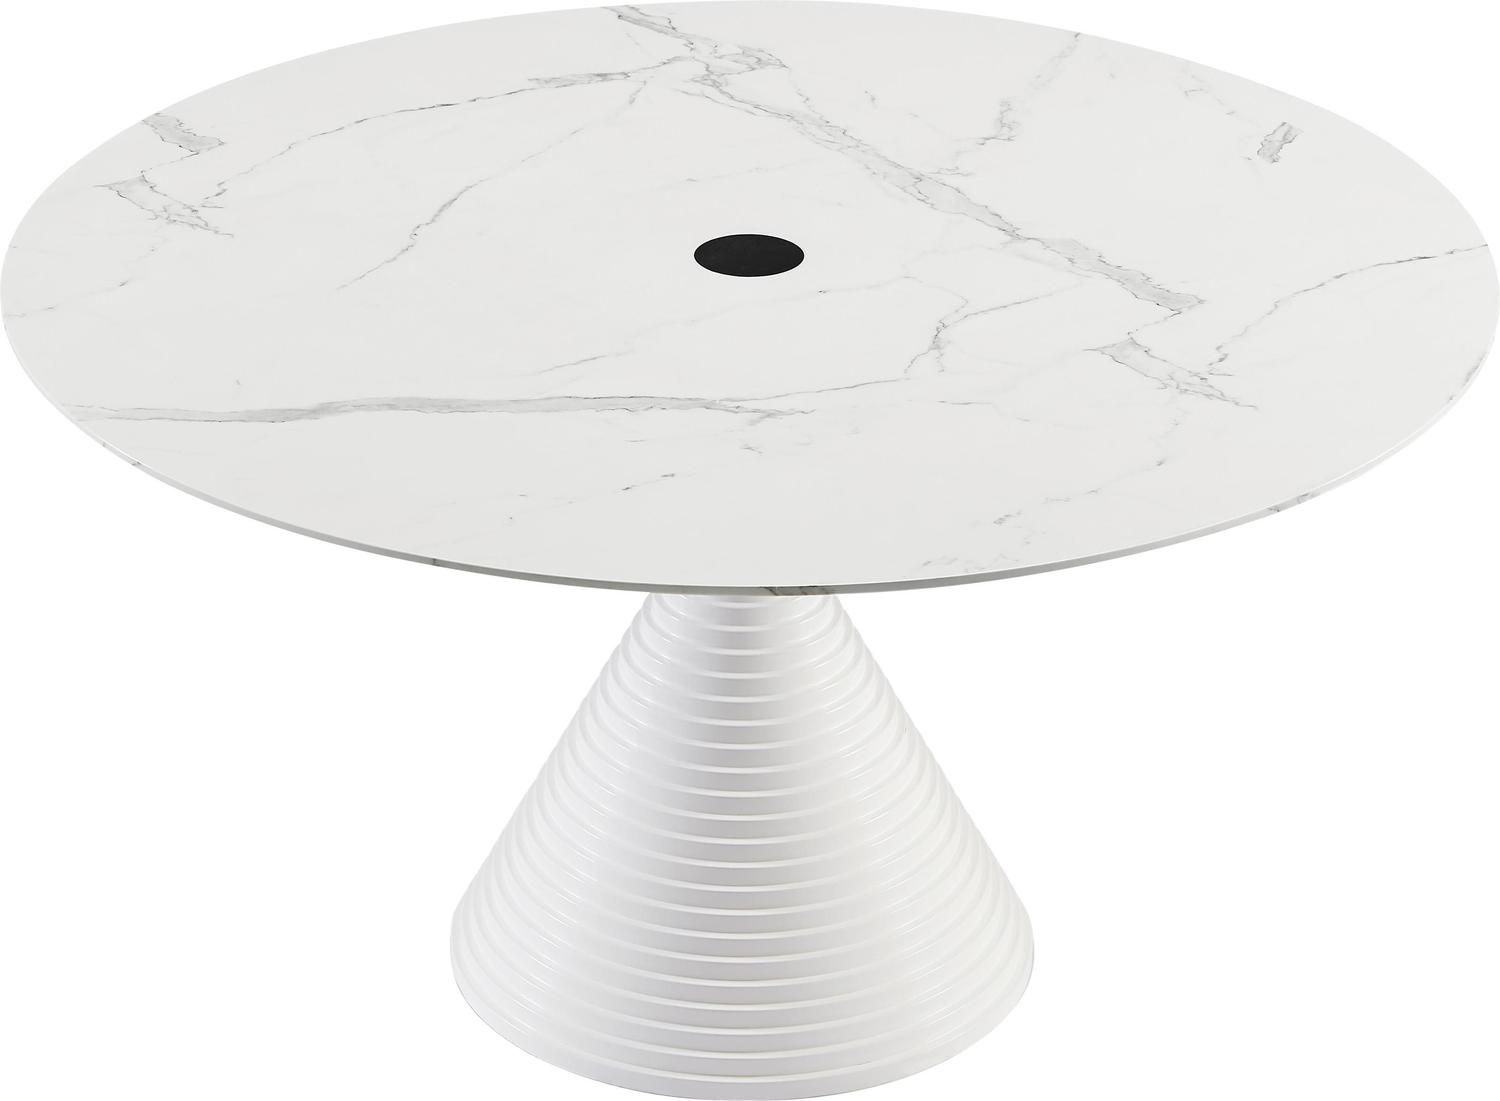 dining table design with price Tov Furniture Dining Tables White